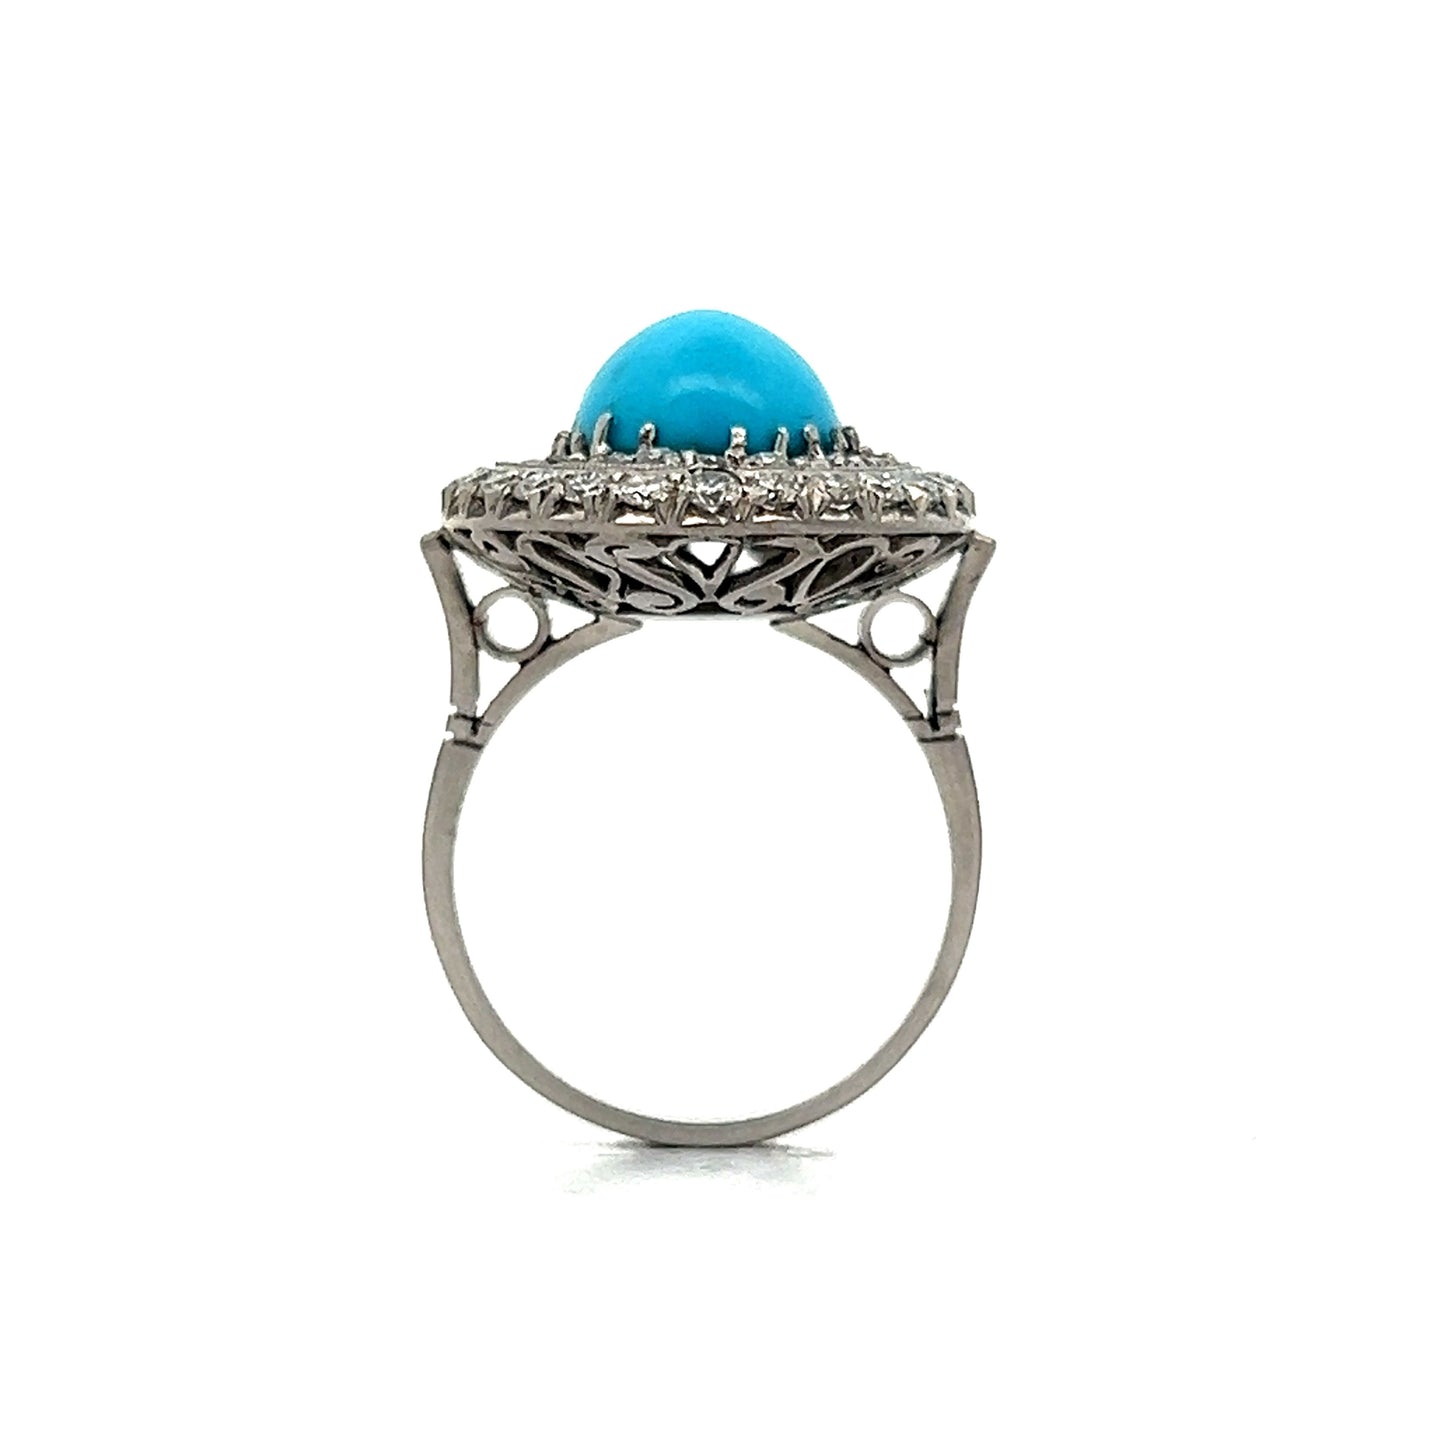 4.91 Vintage Turquoise Double Halo Cocktail Ring in Palladium